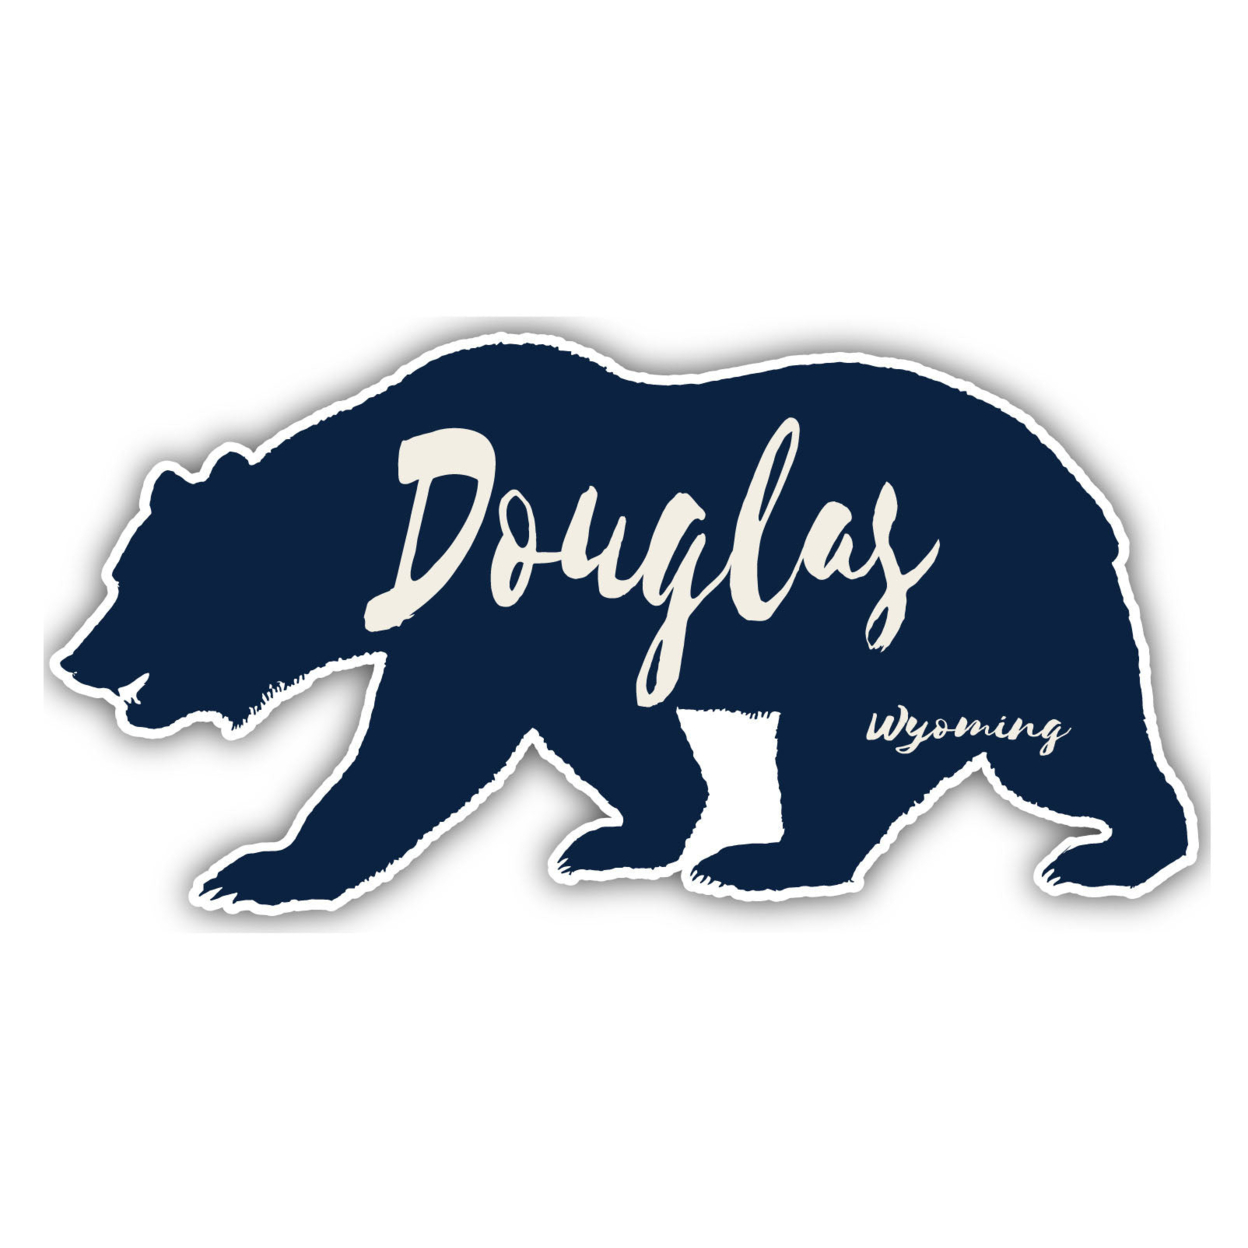 Douglas Wyoming Souvenir Decorative Stickers (Choose Theme And Size) - Single Unit, 12-Inch, Great Outdoors